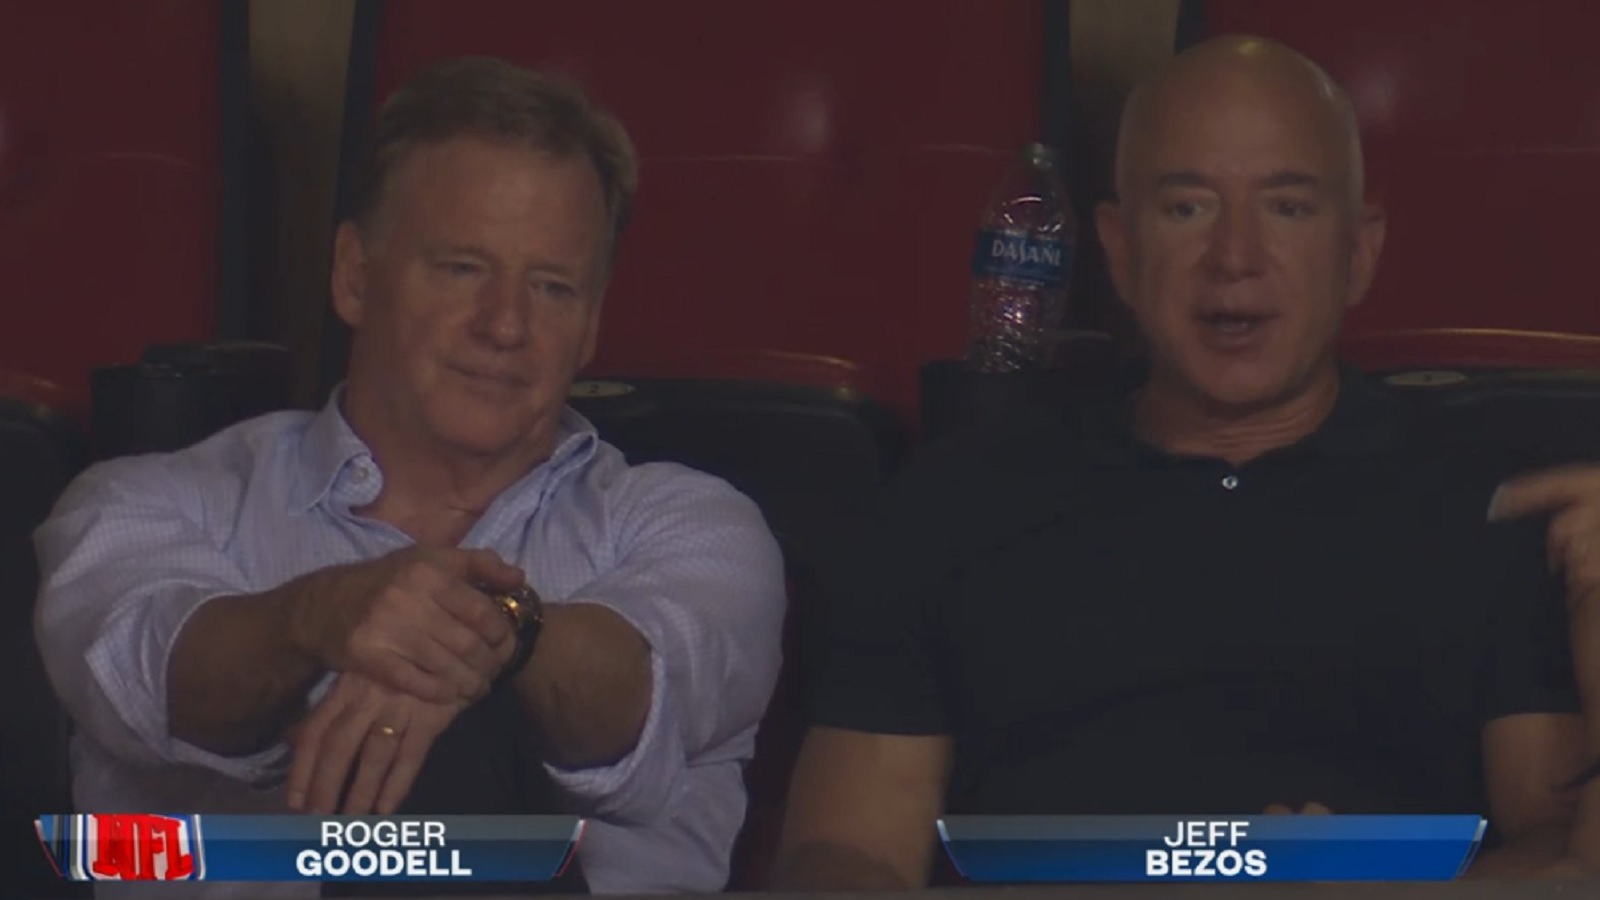 Amazon founder Jeff Bezos makes appearance at Chiefs-Chargers game